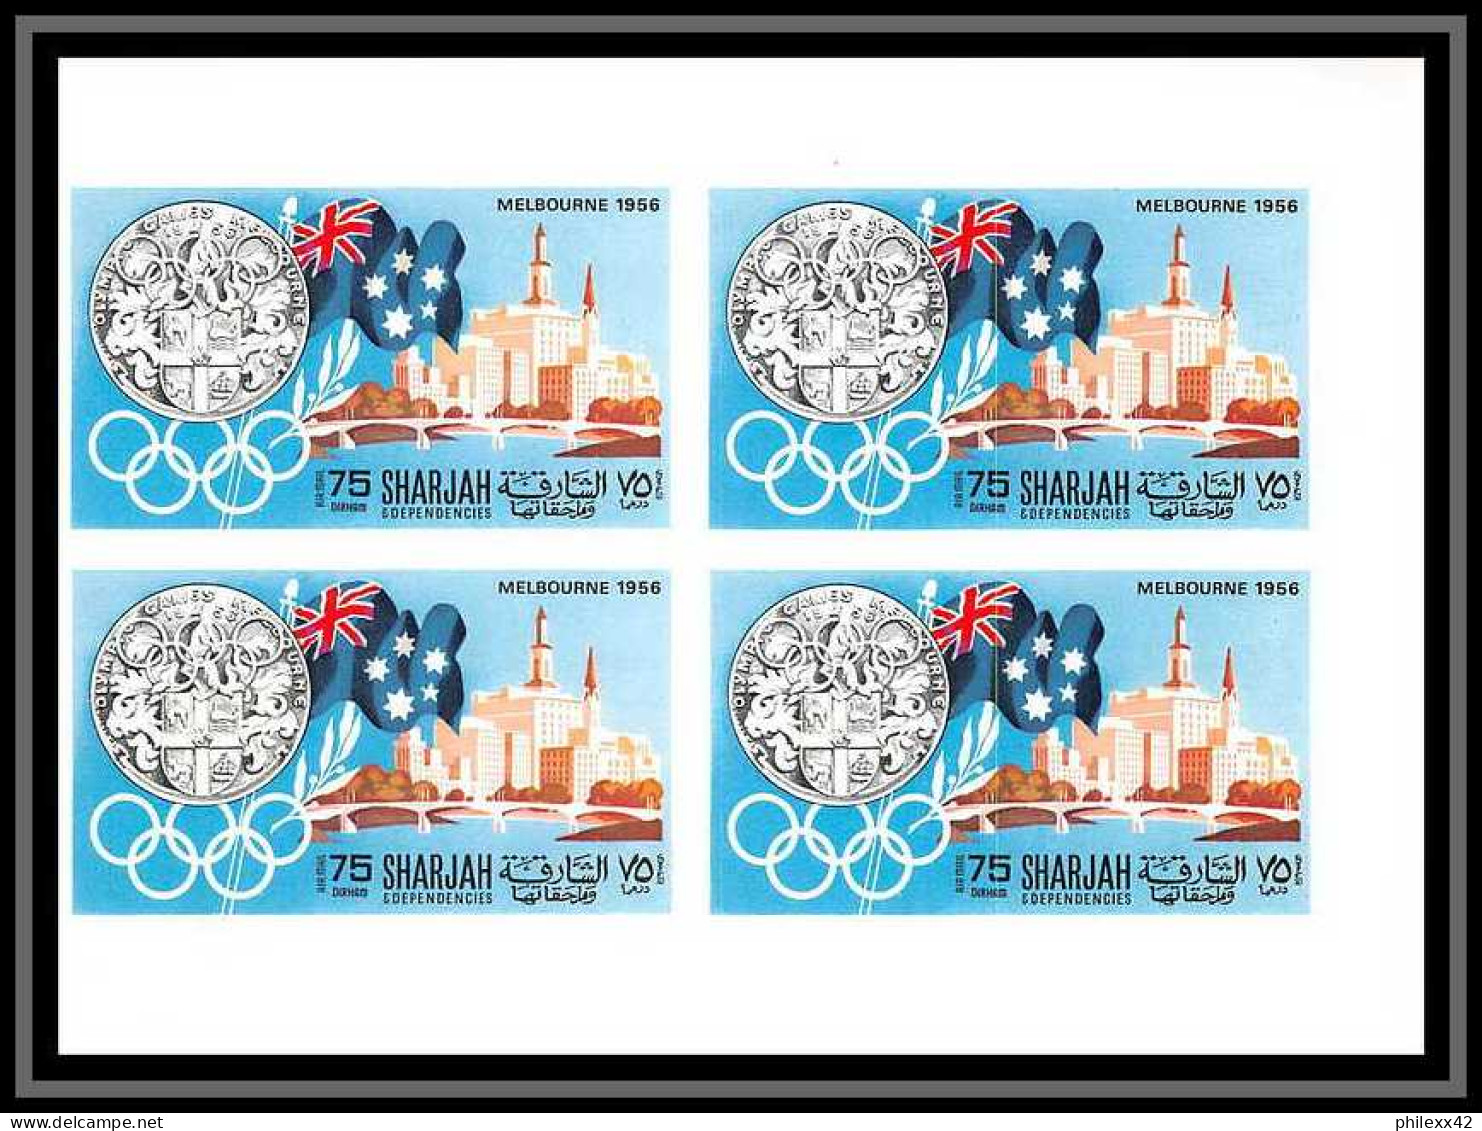 170b Sharjah MNH ** N° 496 / 501 B jeux olympiques (history of the olympic games) mexico bloc 4 non dentelé (Imperf)